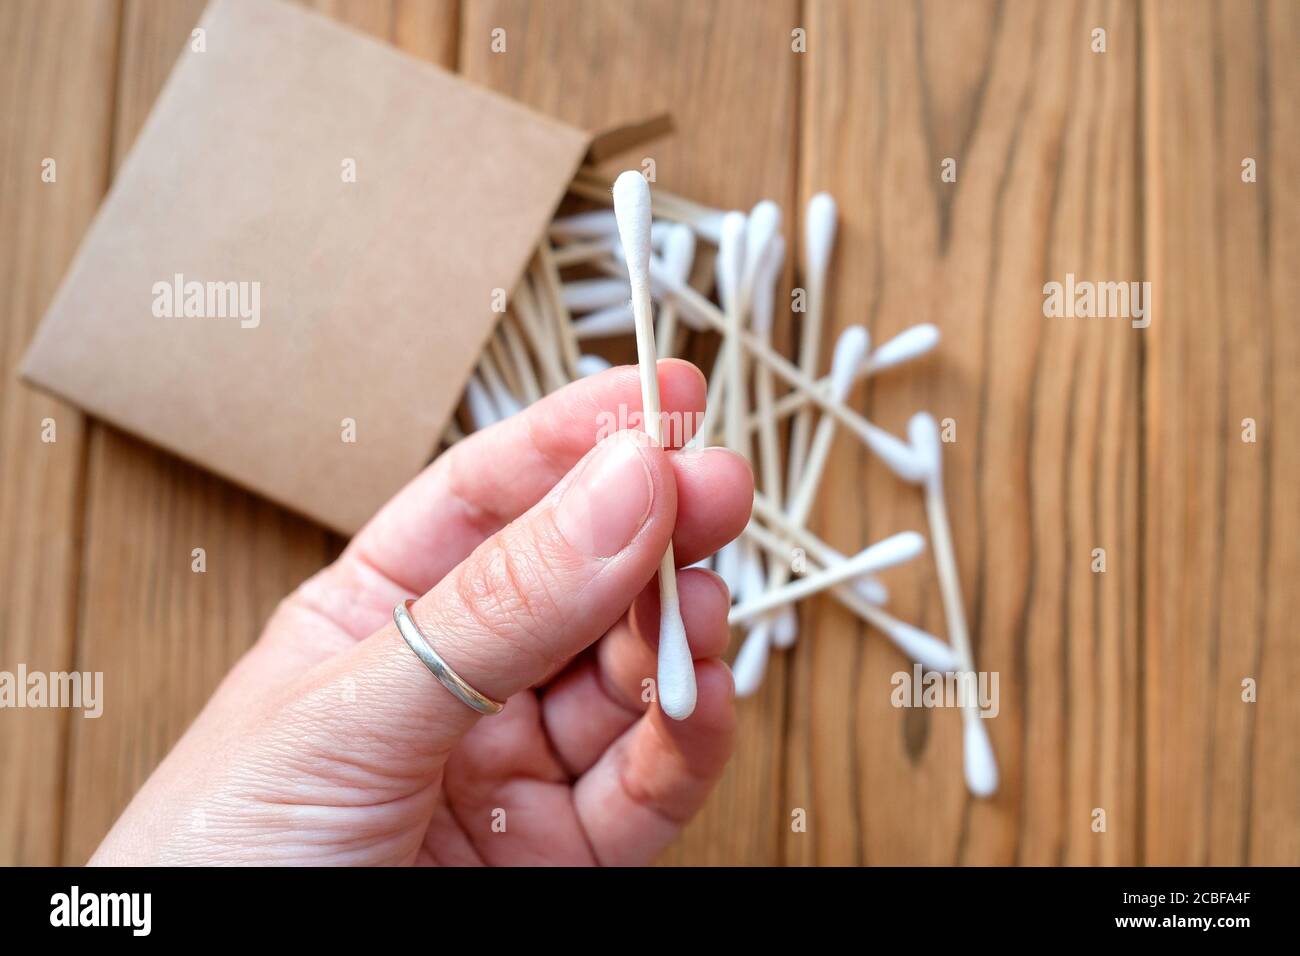 Cotton swab in hand. Eco-friendly ear cleaning and beauty stick. Stock Photo